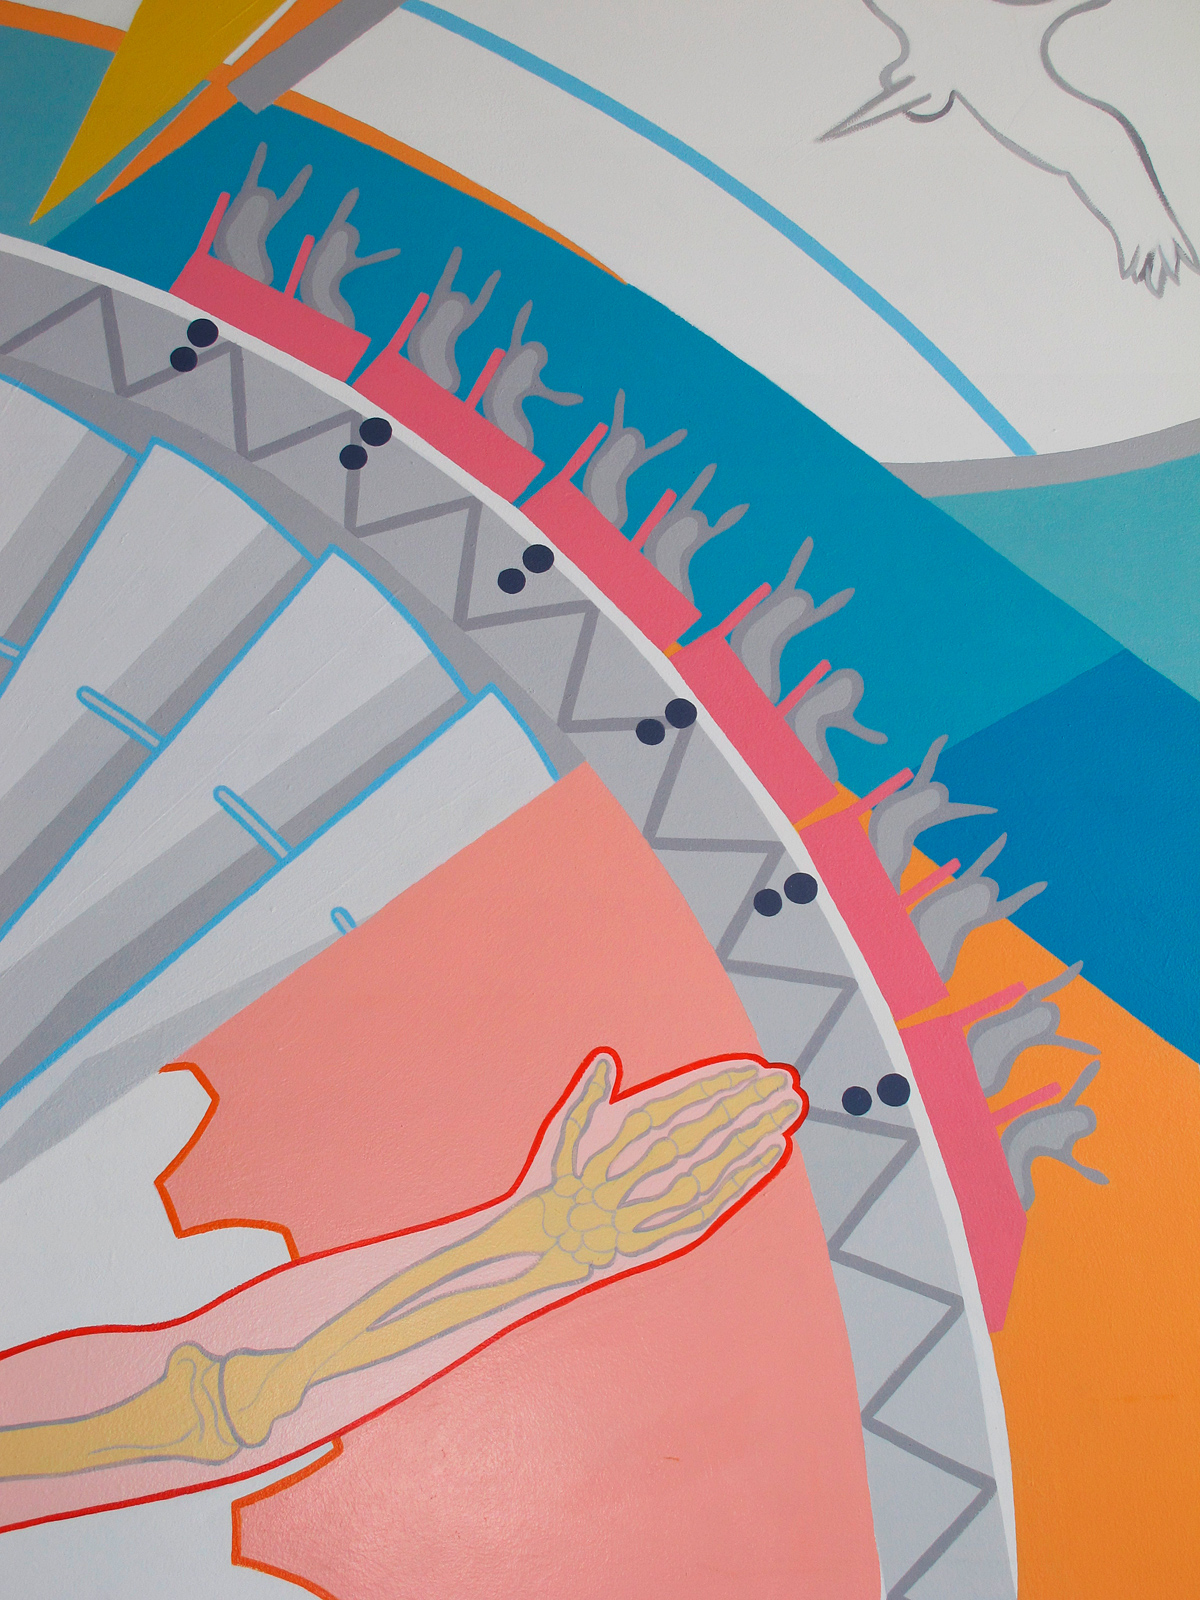 hand and arm detail detail, and rollercoaster in science and engineering mural